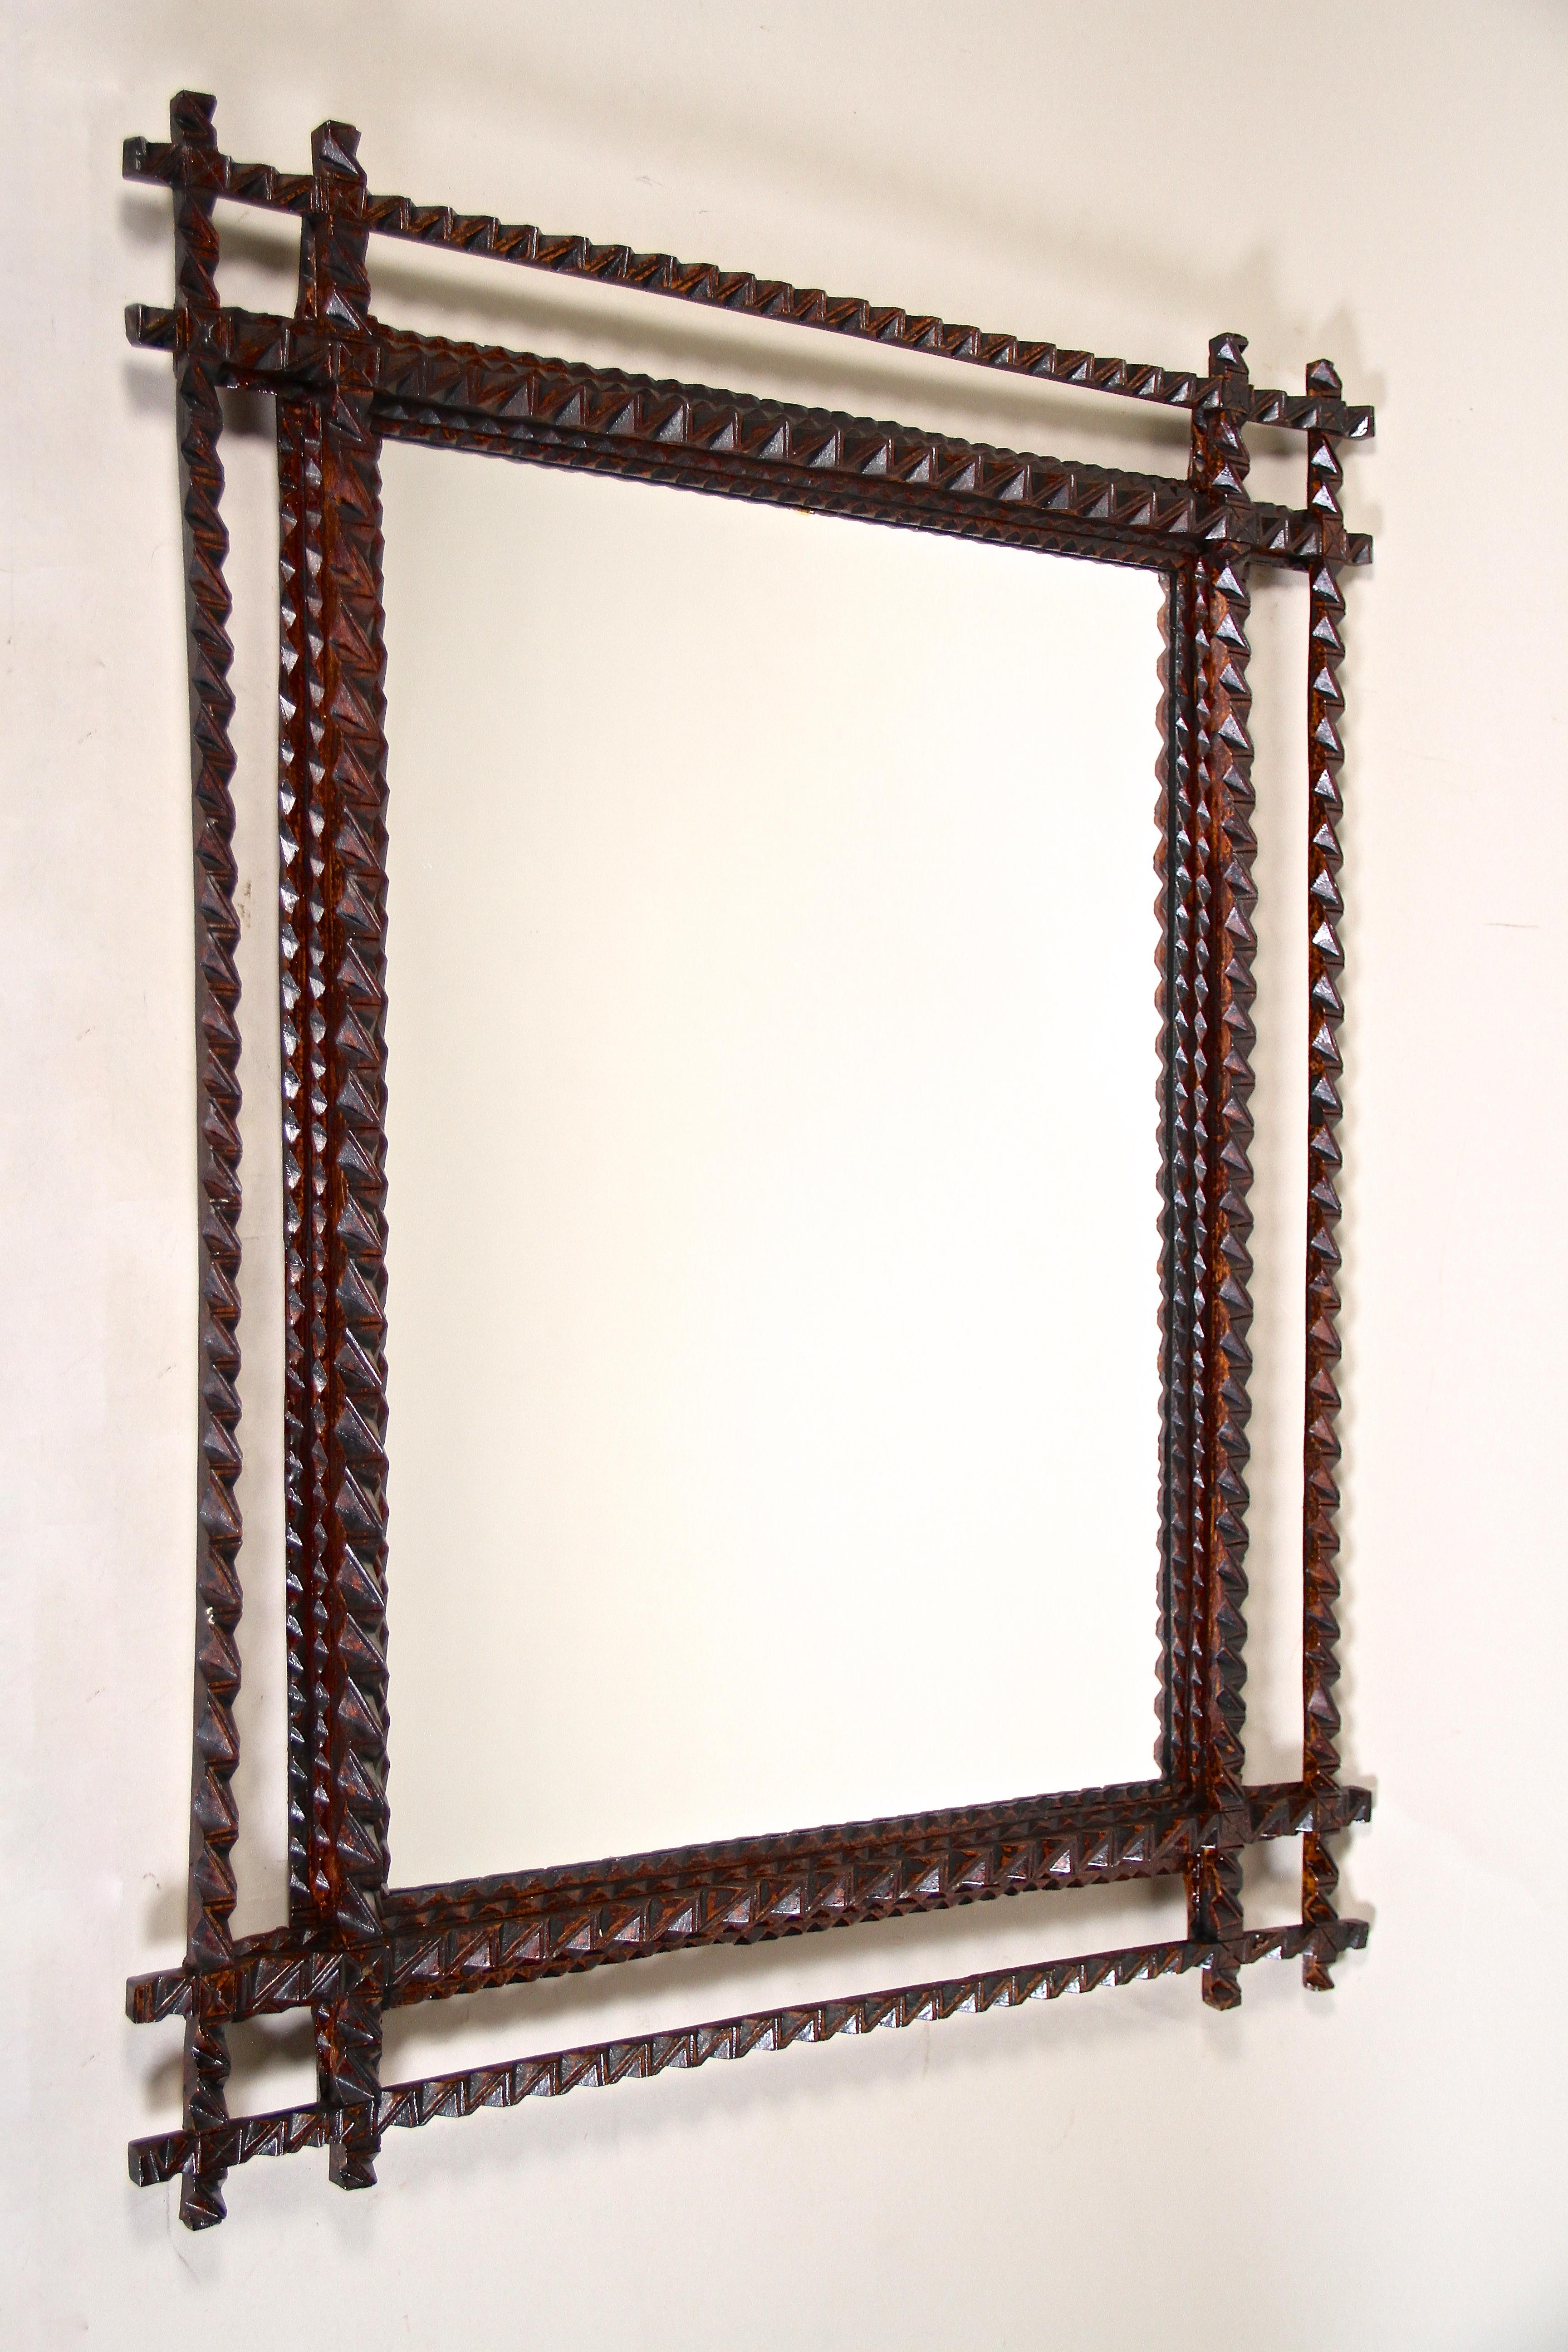 Fantastic Tramp Art Wall Mirror from the late 19th century in Austria around 1880. This rustic mirror has been elaborately hand carved out of basswood and comes with a dark brown stained surface in perfect original condition. Highlighted by a